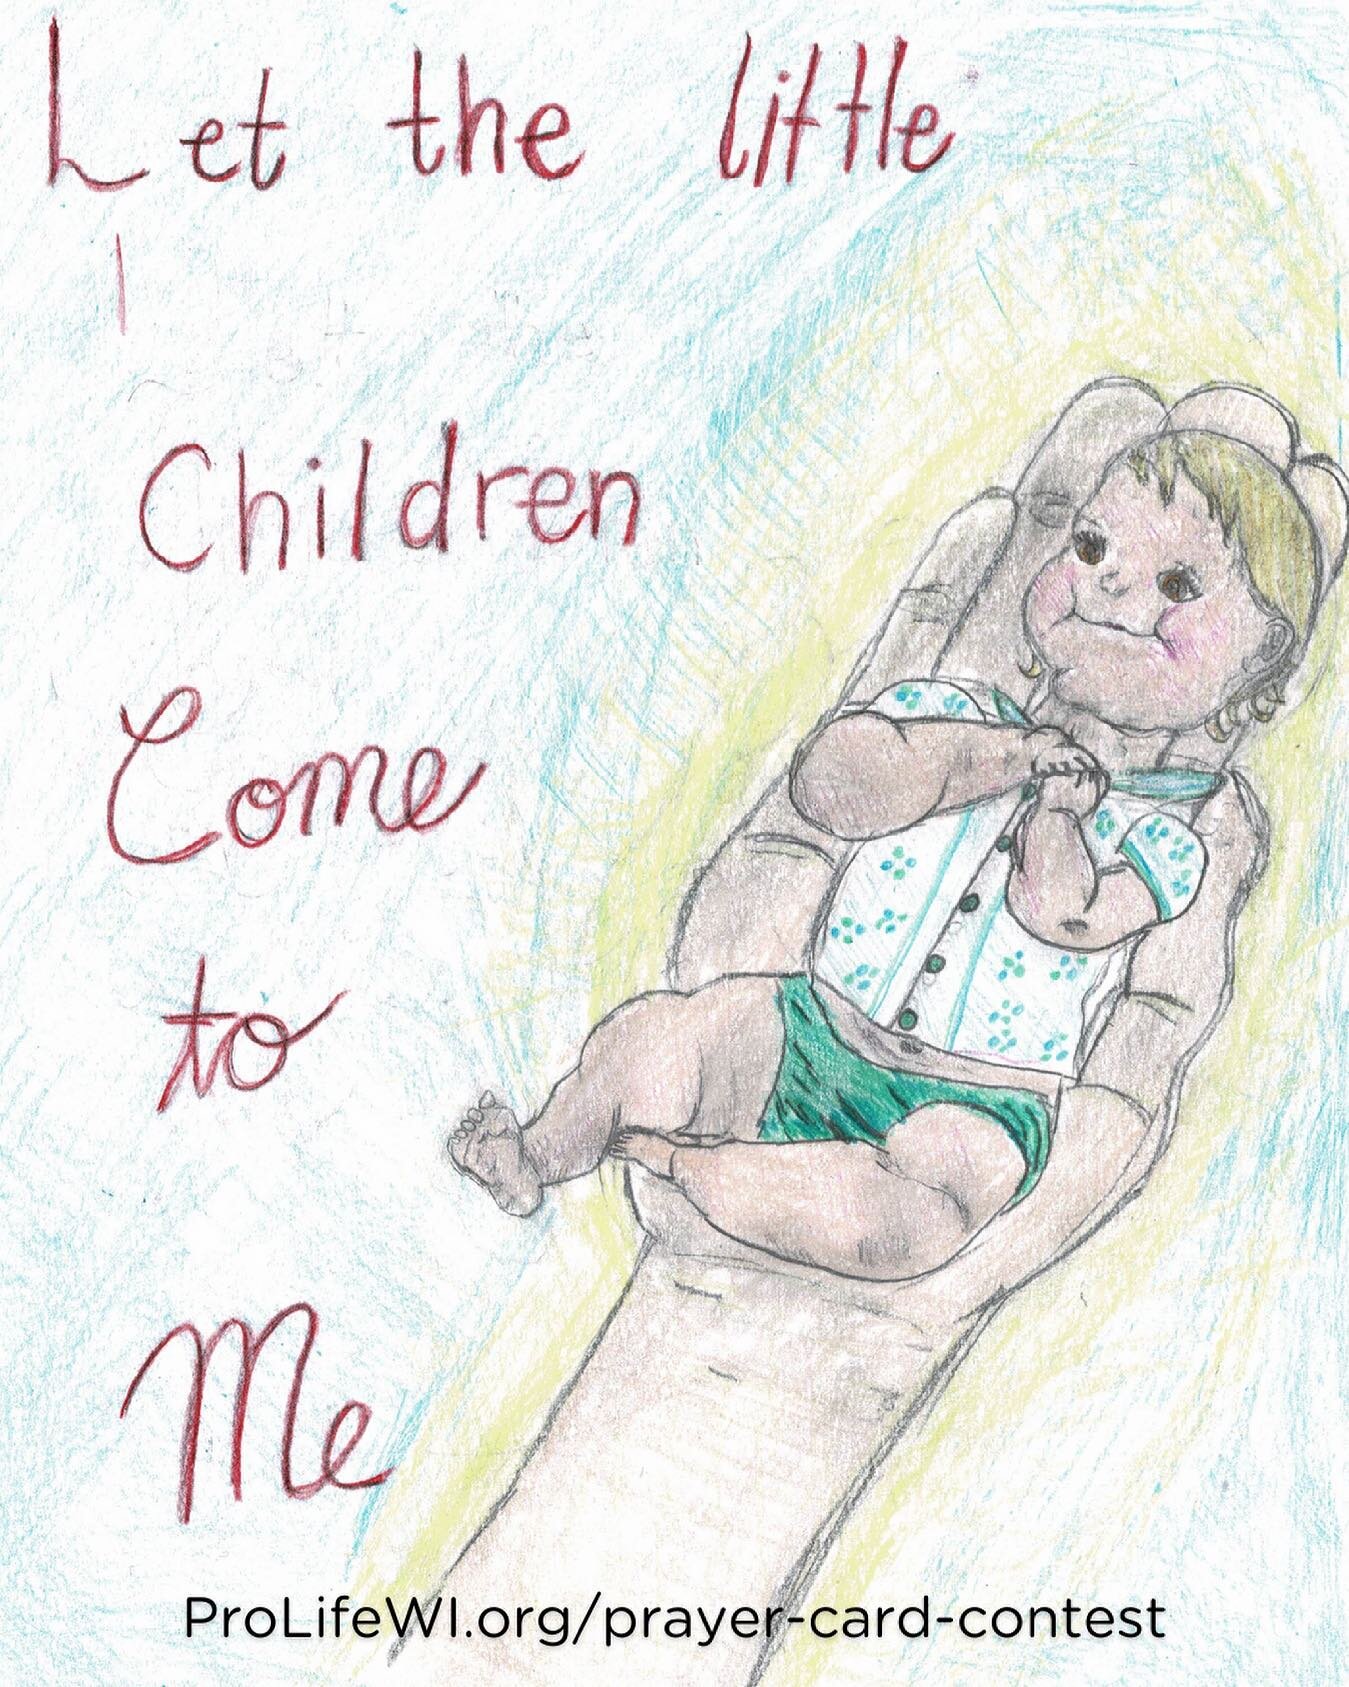 Have you sent in your artwork for the 2021 Prayer Card Art Contest? Featured here is artwork from our previous 6th grade winner. Make sure to submit your entries by April 30! #ProLife